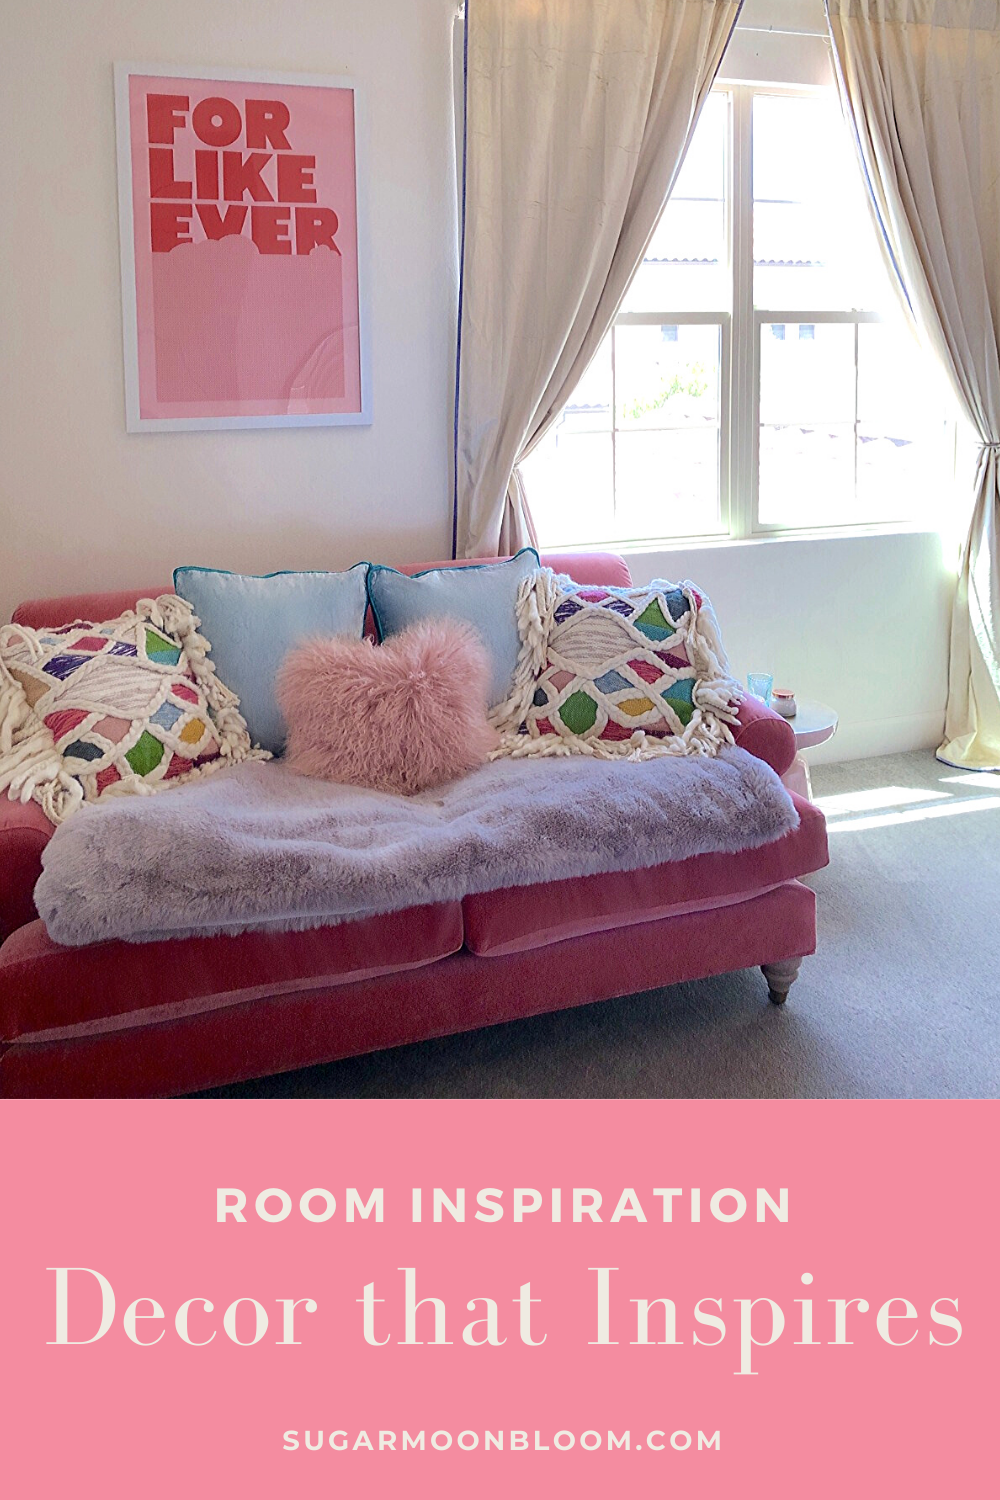 Decor that inspires room inspiration (1).png